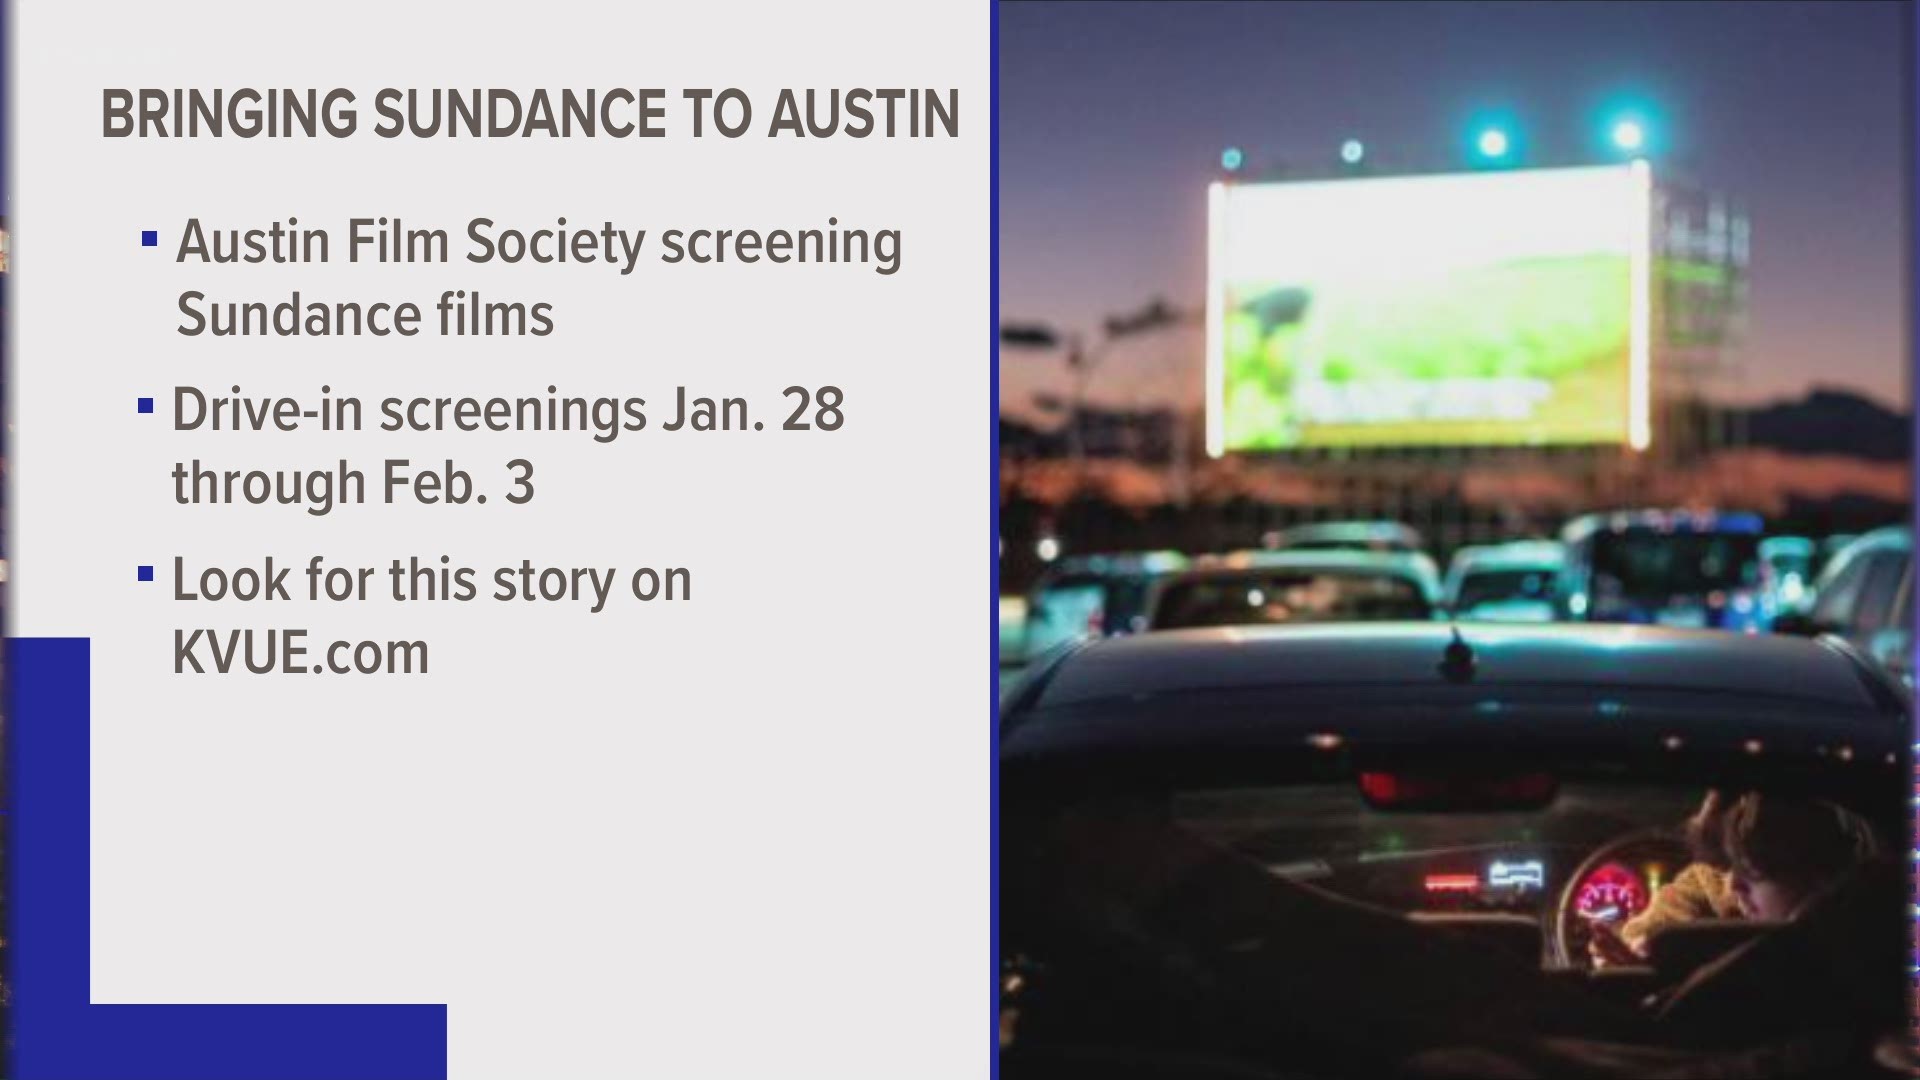 Austinites will have a chance to view films that would have screened at the Sundance Film Festival from the comfort of their car.